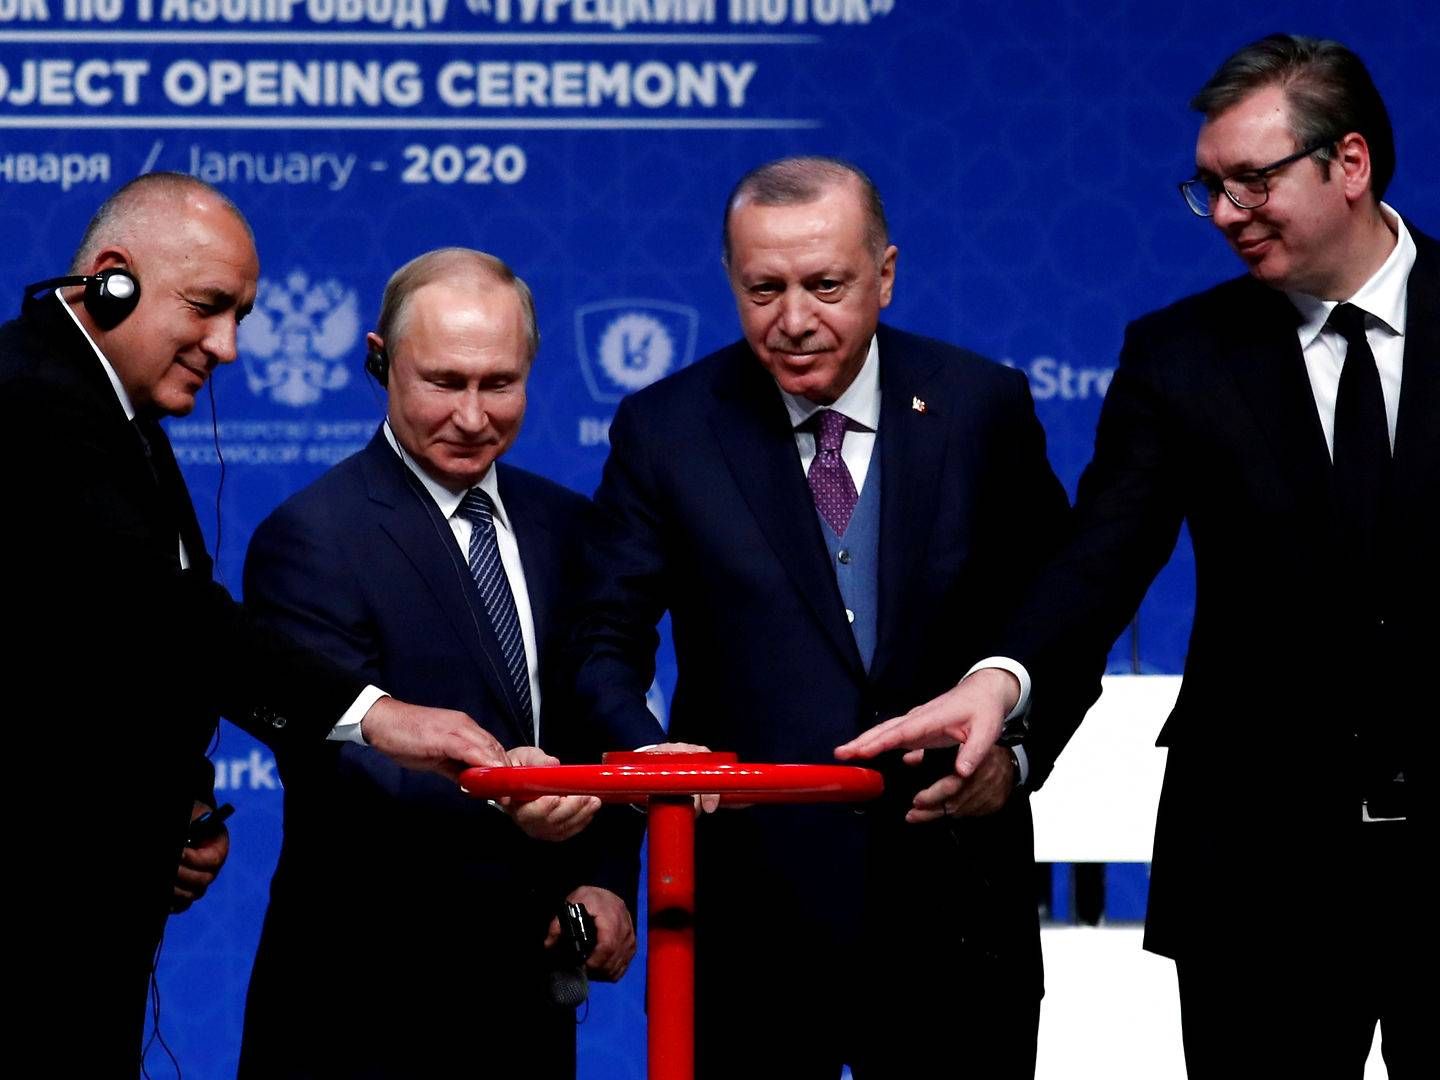 Presidents, foreign ministers, Gazprom executives and many others were present when Russia and Turkey opened Turkstream last week. | Photo: Umit Bektas/Reuters/Ritzau Scanpix